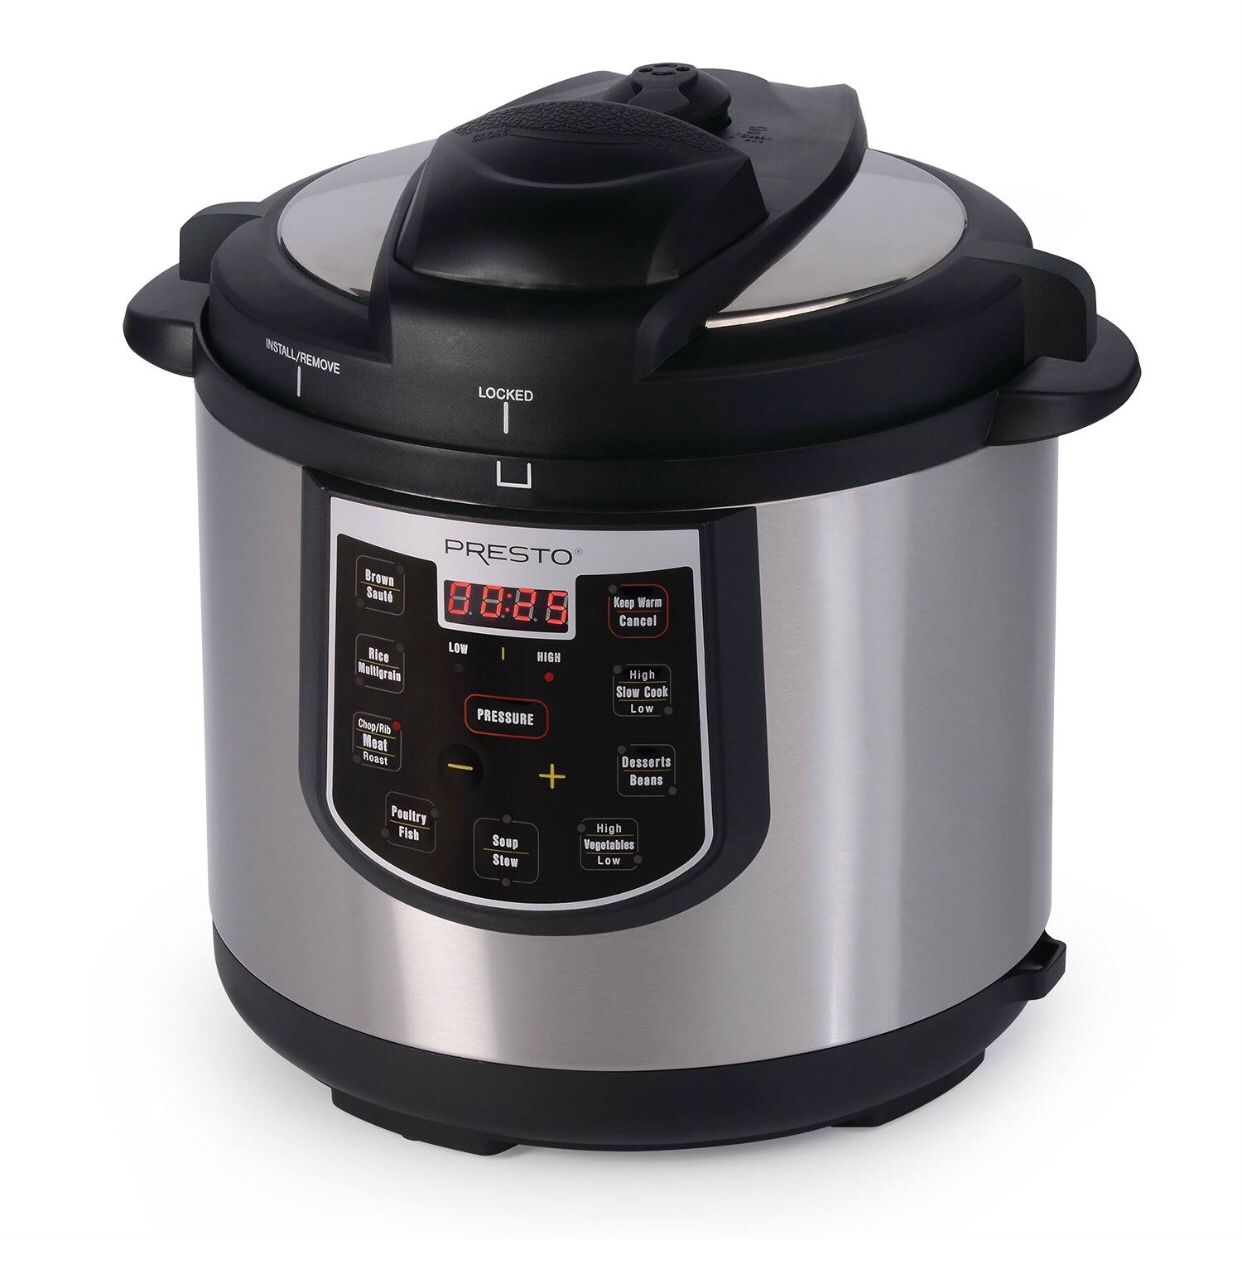 Simfonio Electric Pressure Cooker 6QT 10 in 1 Olla reina - Olla Multiuso  Stainless Steel Hot Pot for Sale in Miami, FL - OfferUp